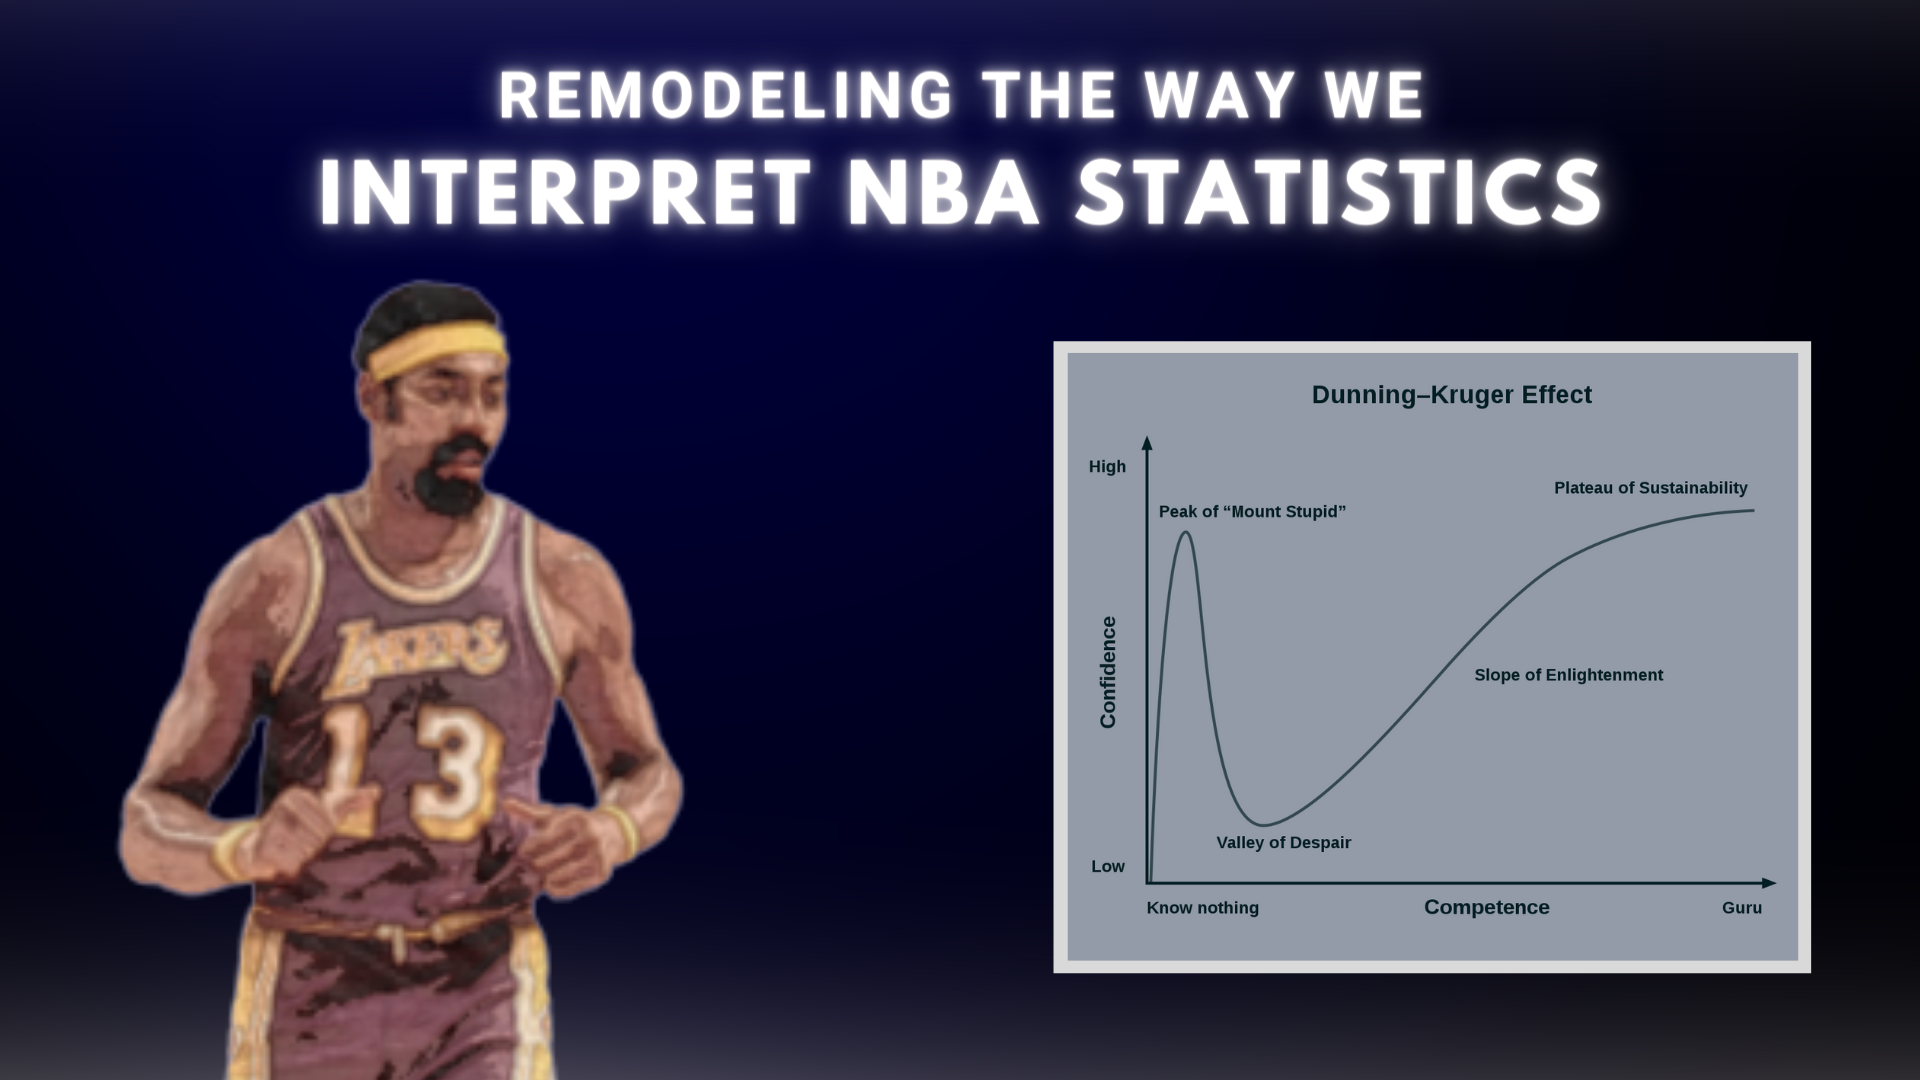 Wilt Chamberlain and the Dunning-Kruger Curve of Statistical Analysis